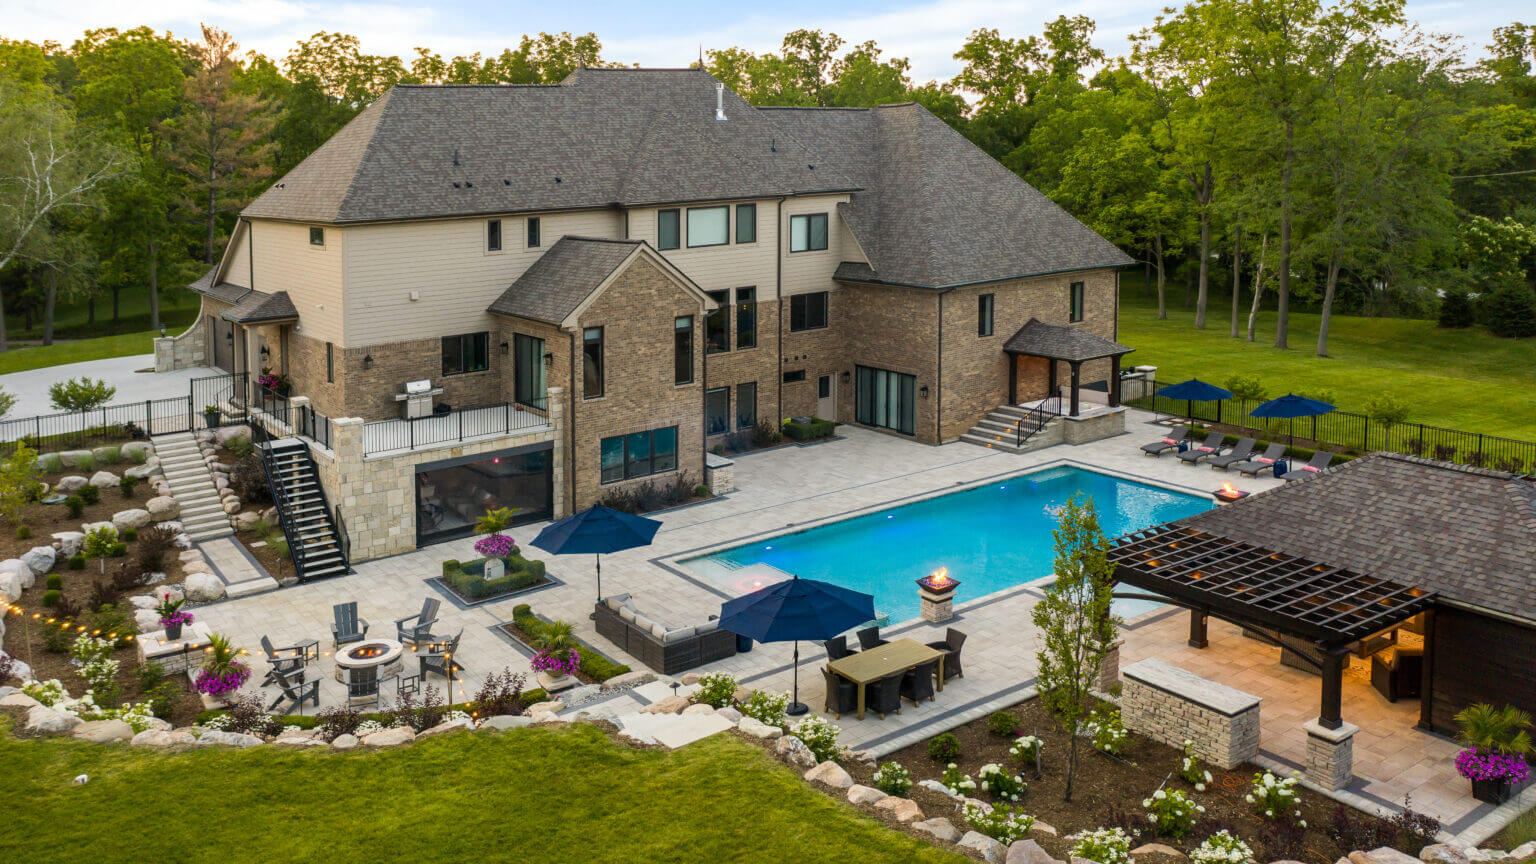 gunite pools, patio pavers, concrete paving, inground pools, pool and spa, fire bowls, patio covers in michigan, patio ideas, pool inspo, gazebos in michigan, cabanas in Michigan, backyard design, backyard landscape design, fire bowls, pool fountains, concrete builders, unilock, outdoor fireplaces in michigan, jacuzzi, outdoor hot tubs, pergola, gazebo, backyard ideas, patio design near me, fire glass, backyard ideas, landscape architecture